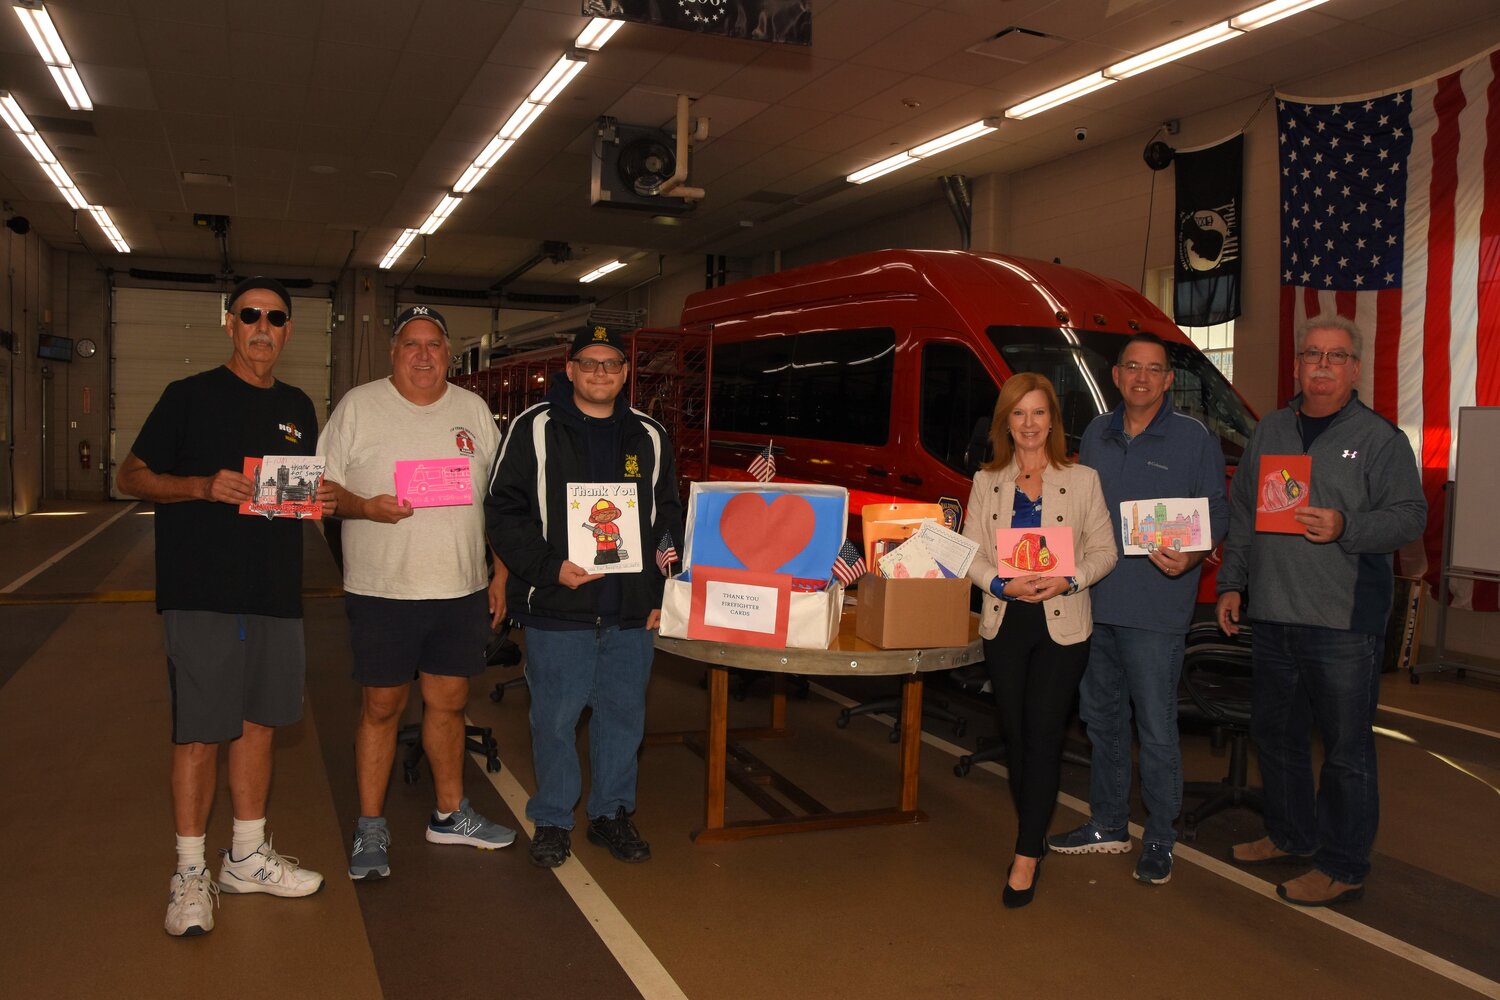 Laura Ryder stopped by Baldwin Fire Department Headquarters to drop off cards that Baldwin students created in appreciation for firefighters. Councilwoman Ryder was joined by Chief Michael Parise and department members Paul Yanantuono, Matt Peletier, Douglas Wiedmann, and Tom Brown.